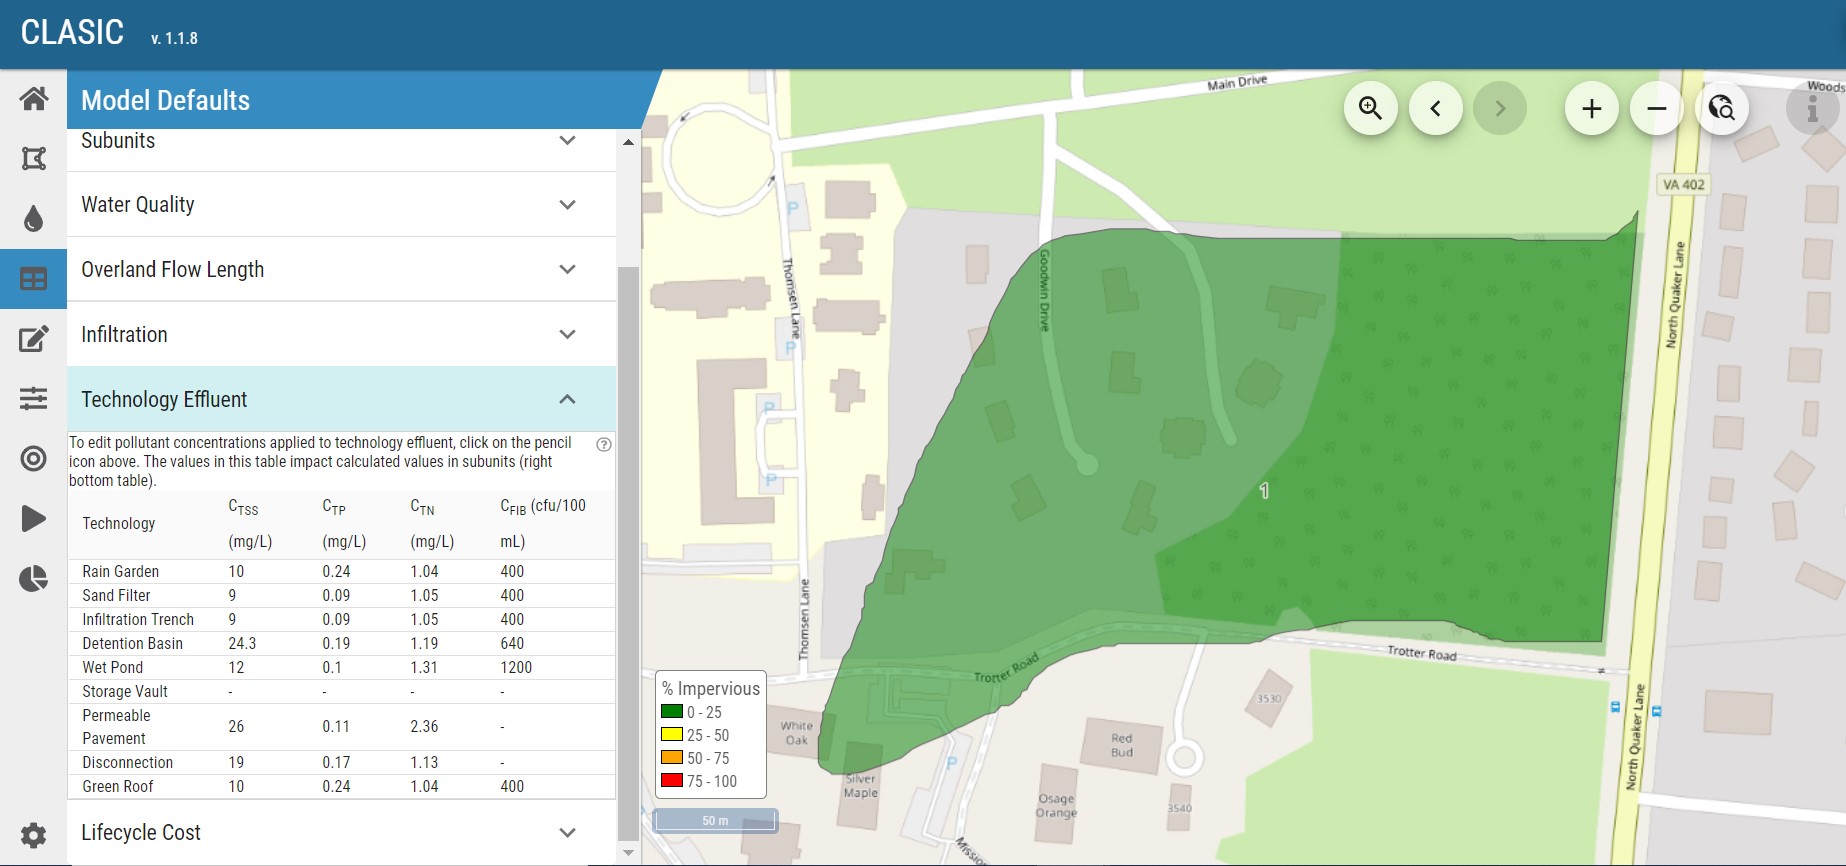 A screenshot of the tool, Community-enabled Lifecycle Analysis of Stormwater Infrastructure Costs, being used.